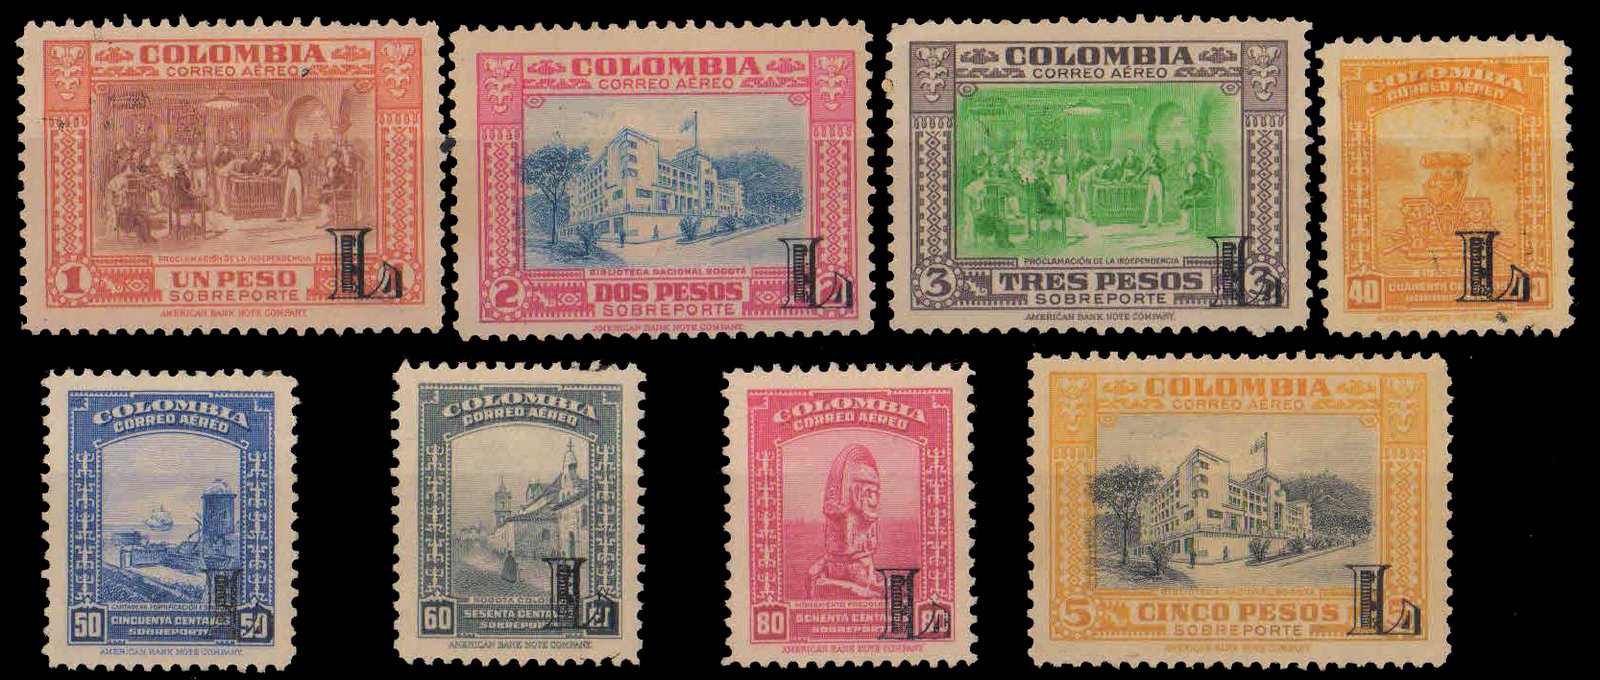 COLOMBIA 1951-Private Air Companies Issue "LANSA" Overprint 'L'-Set of 8-MNH, S.G. 21-28-Cat £ 115-